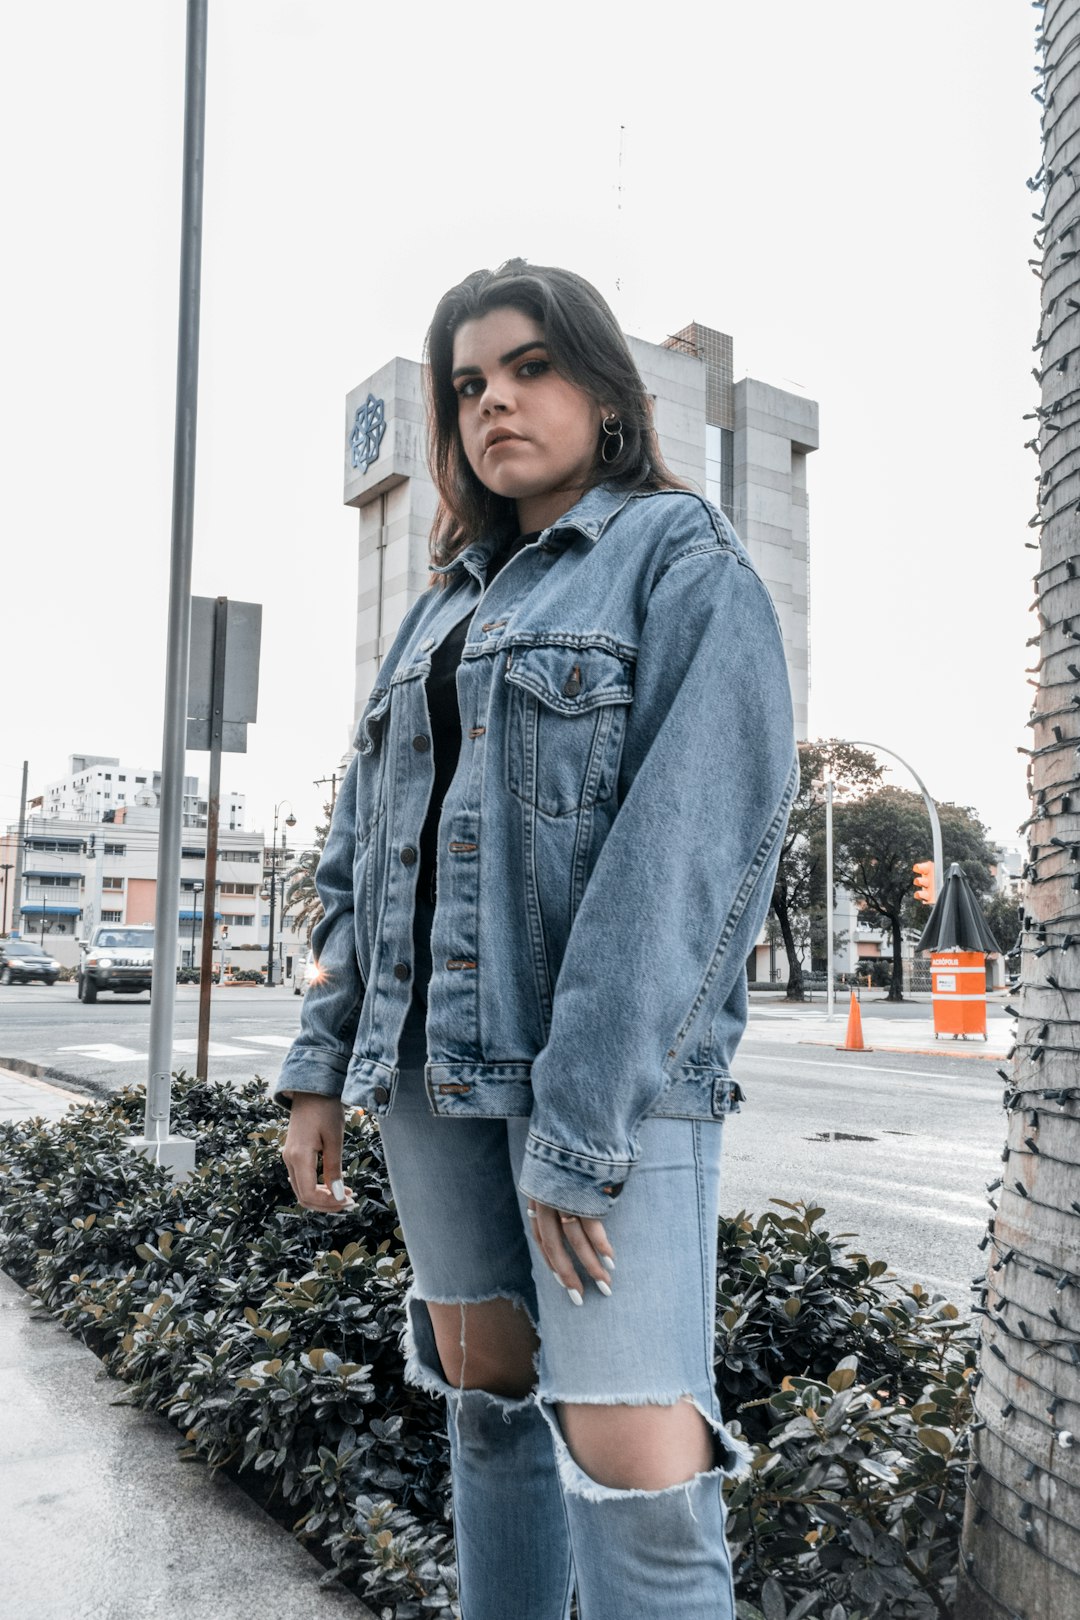 woman in blue denim jacket standing on the street during daytime